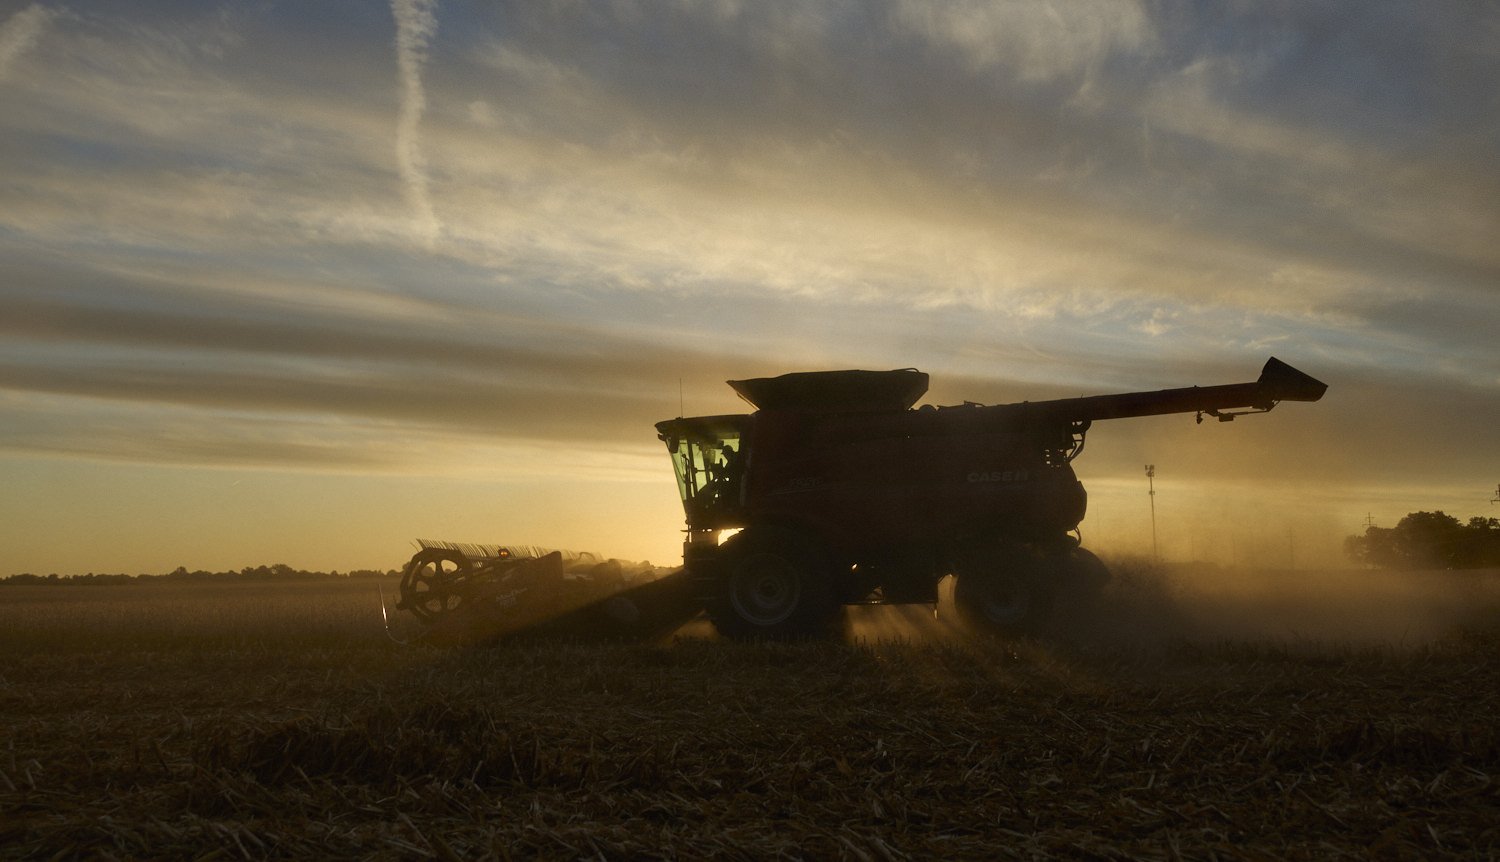  Corn and soybean harvest in Illinois 